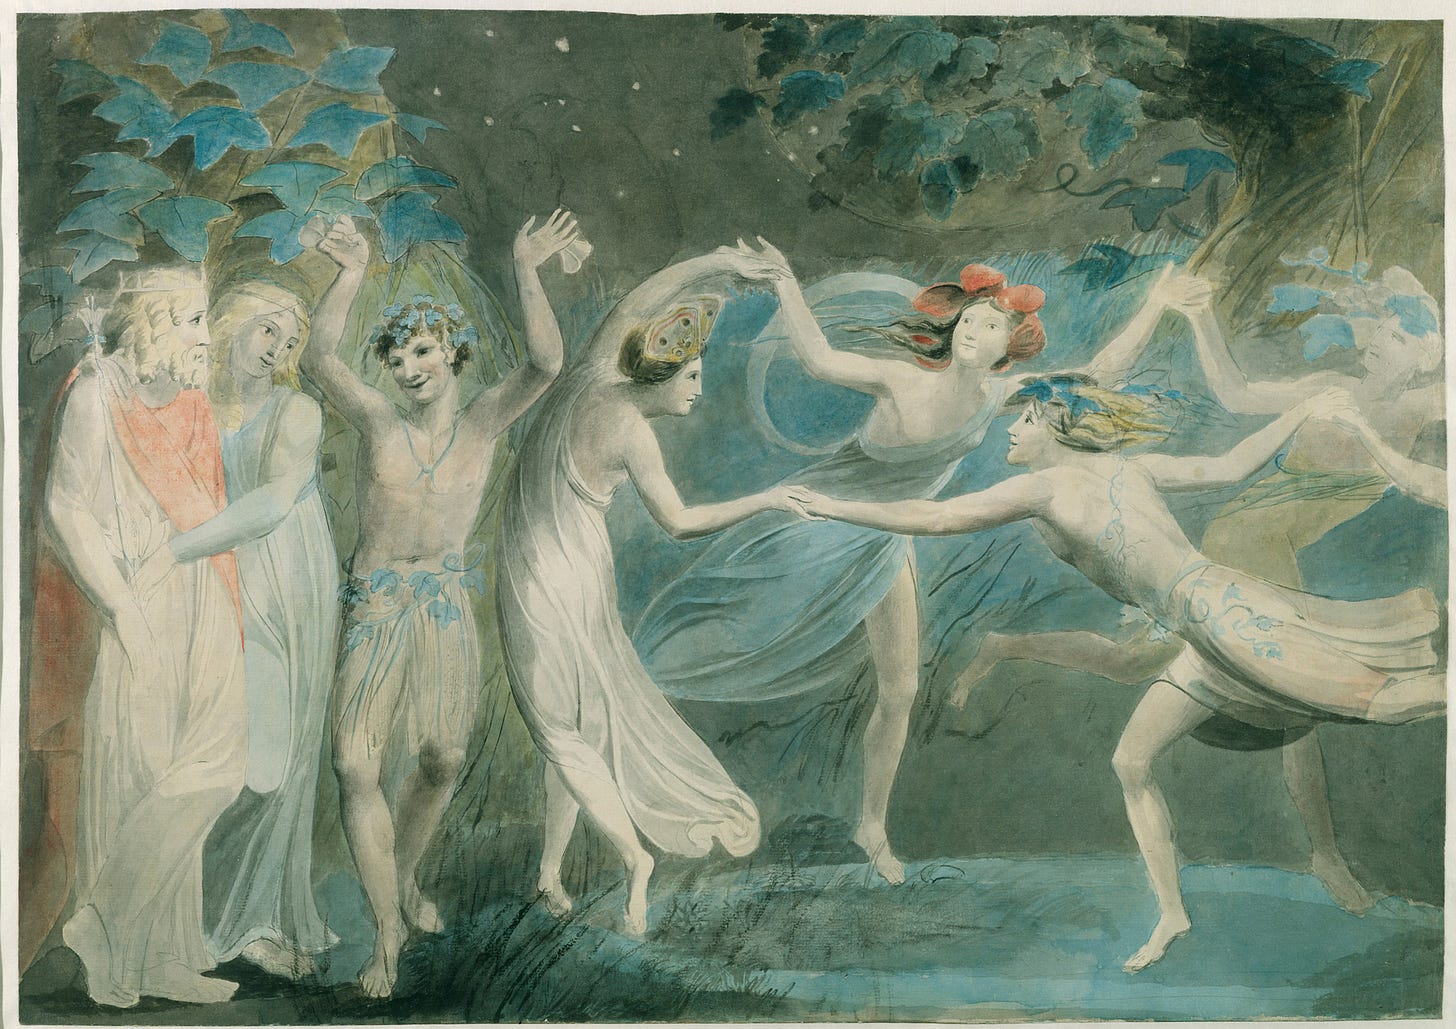 William Blake painting of fairies in A Midsummer Night's Dream | The  British Library